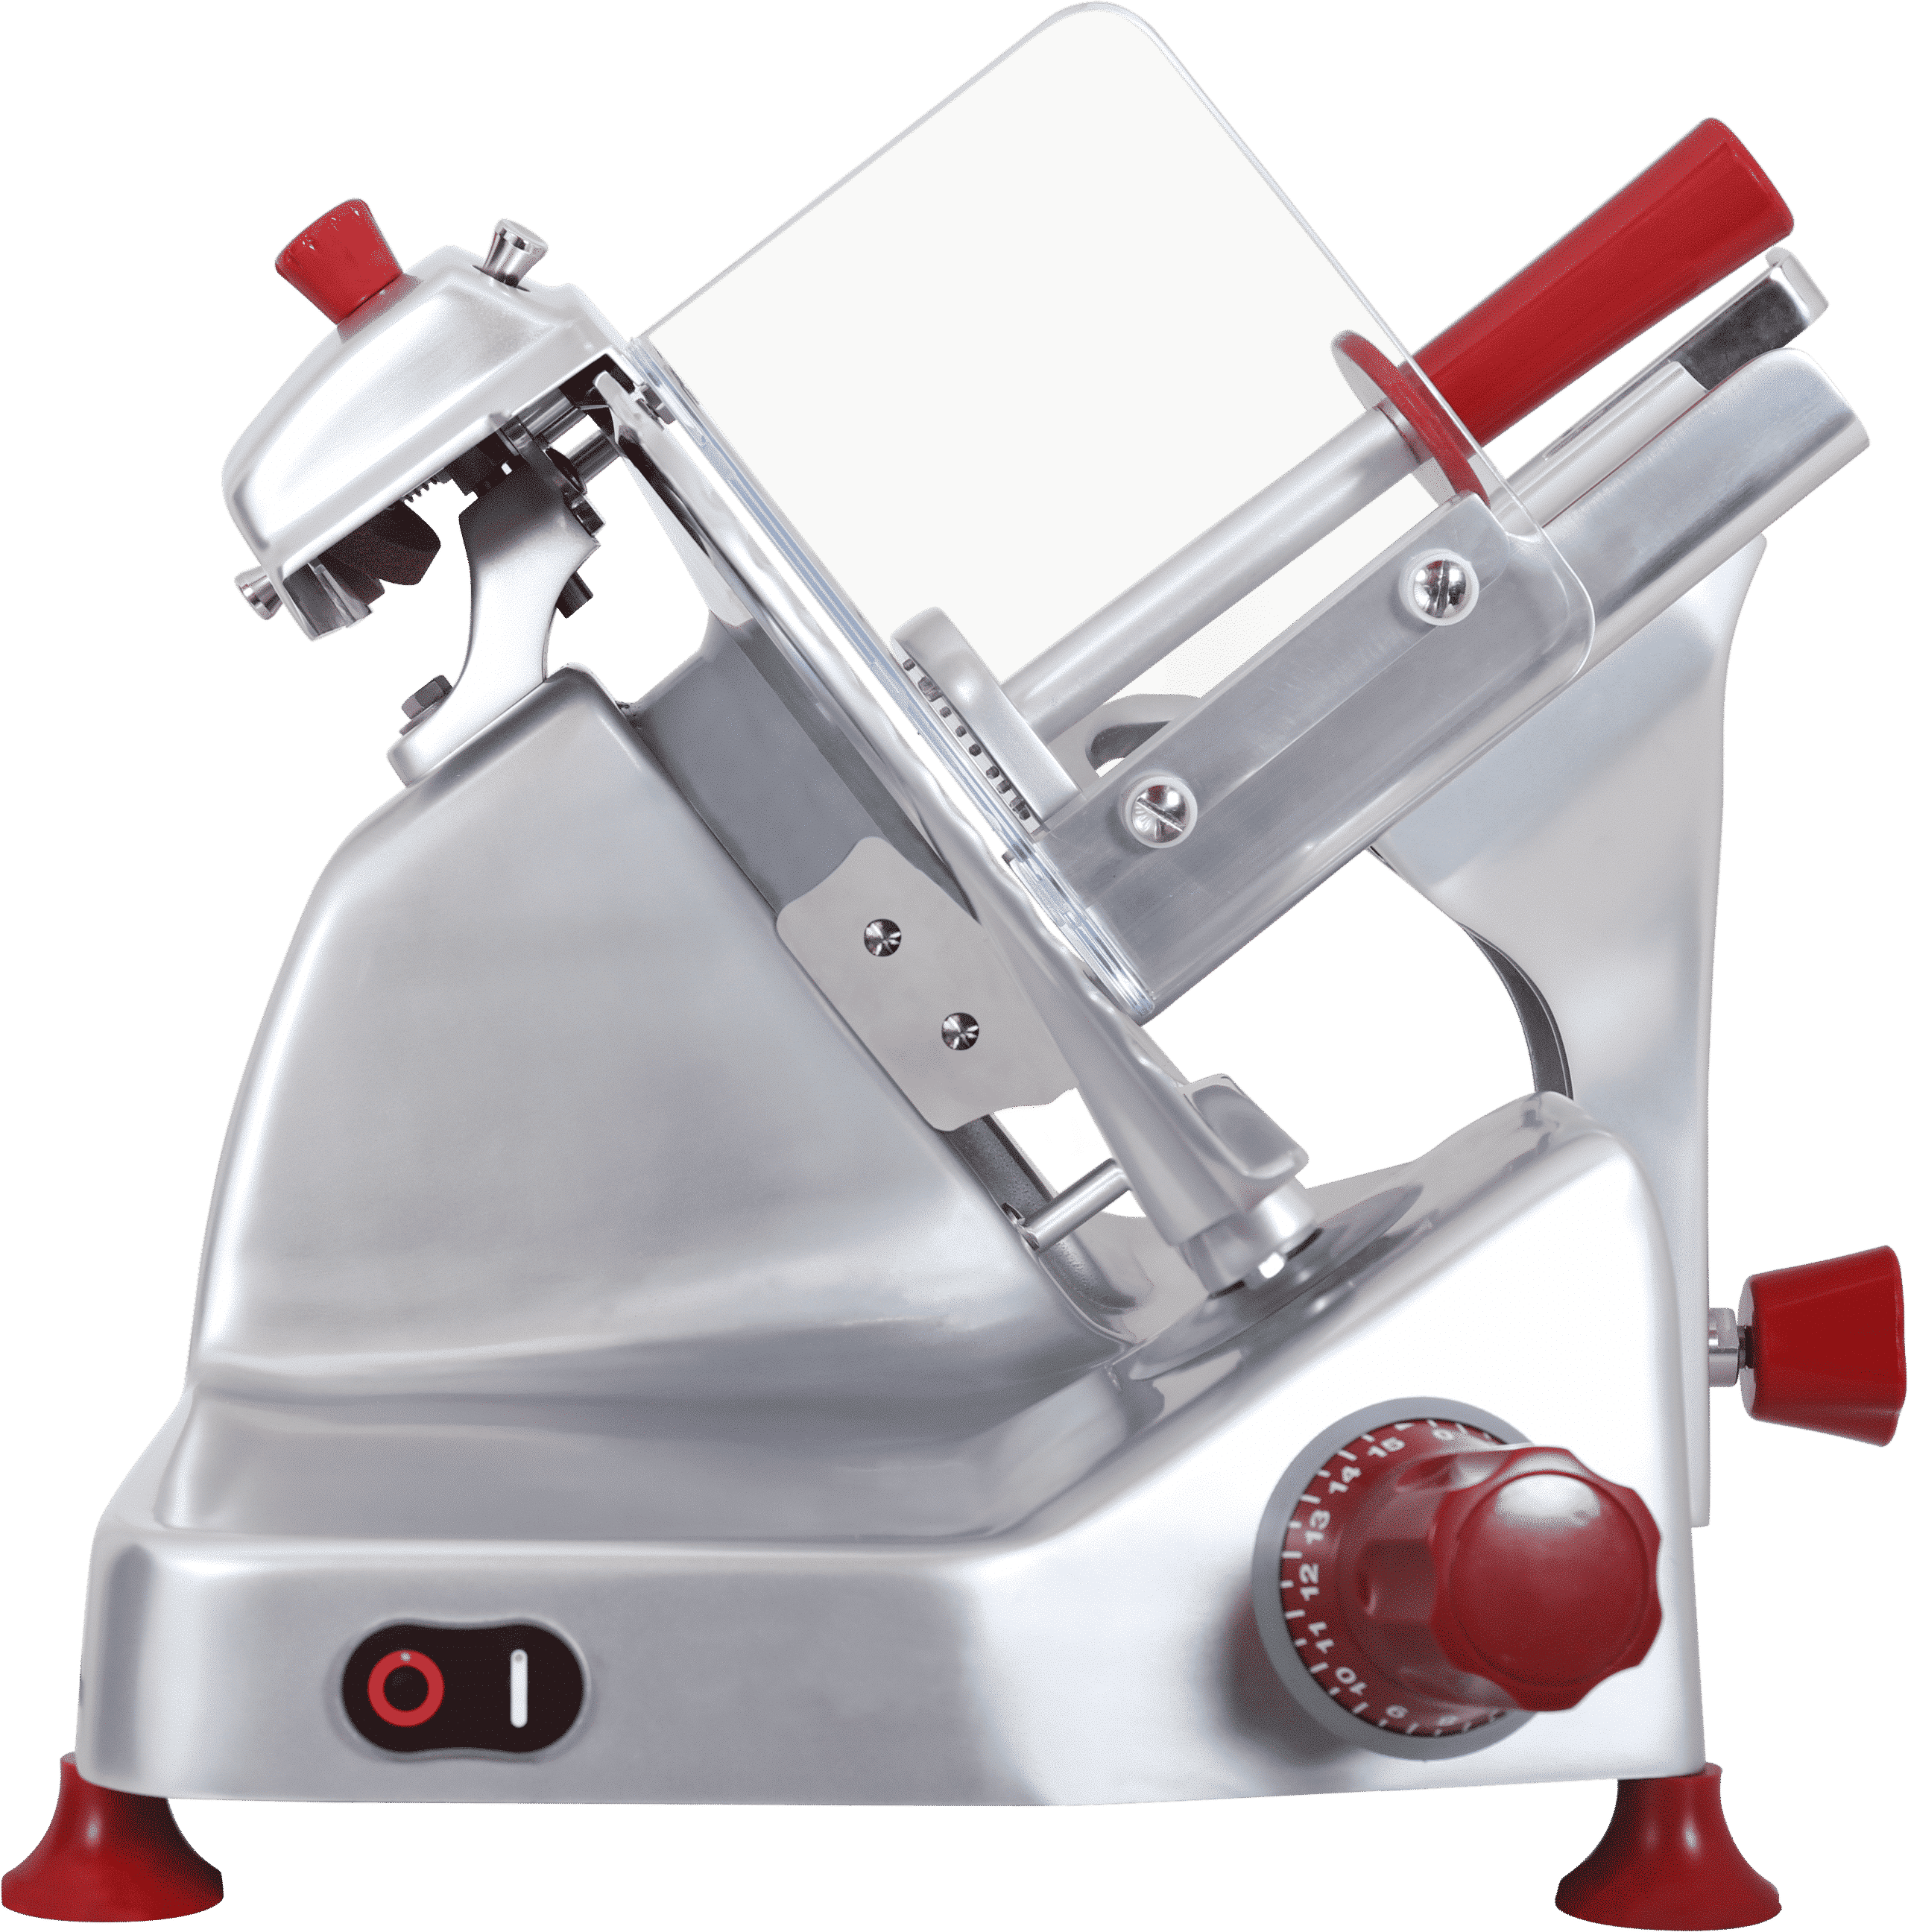 Expert electric gravity feed slicer Pro Line XS25 features a modern appearance, premium components, and compatibility with HO.RE.CA channels